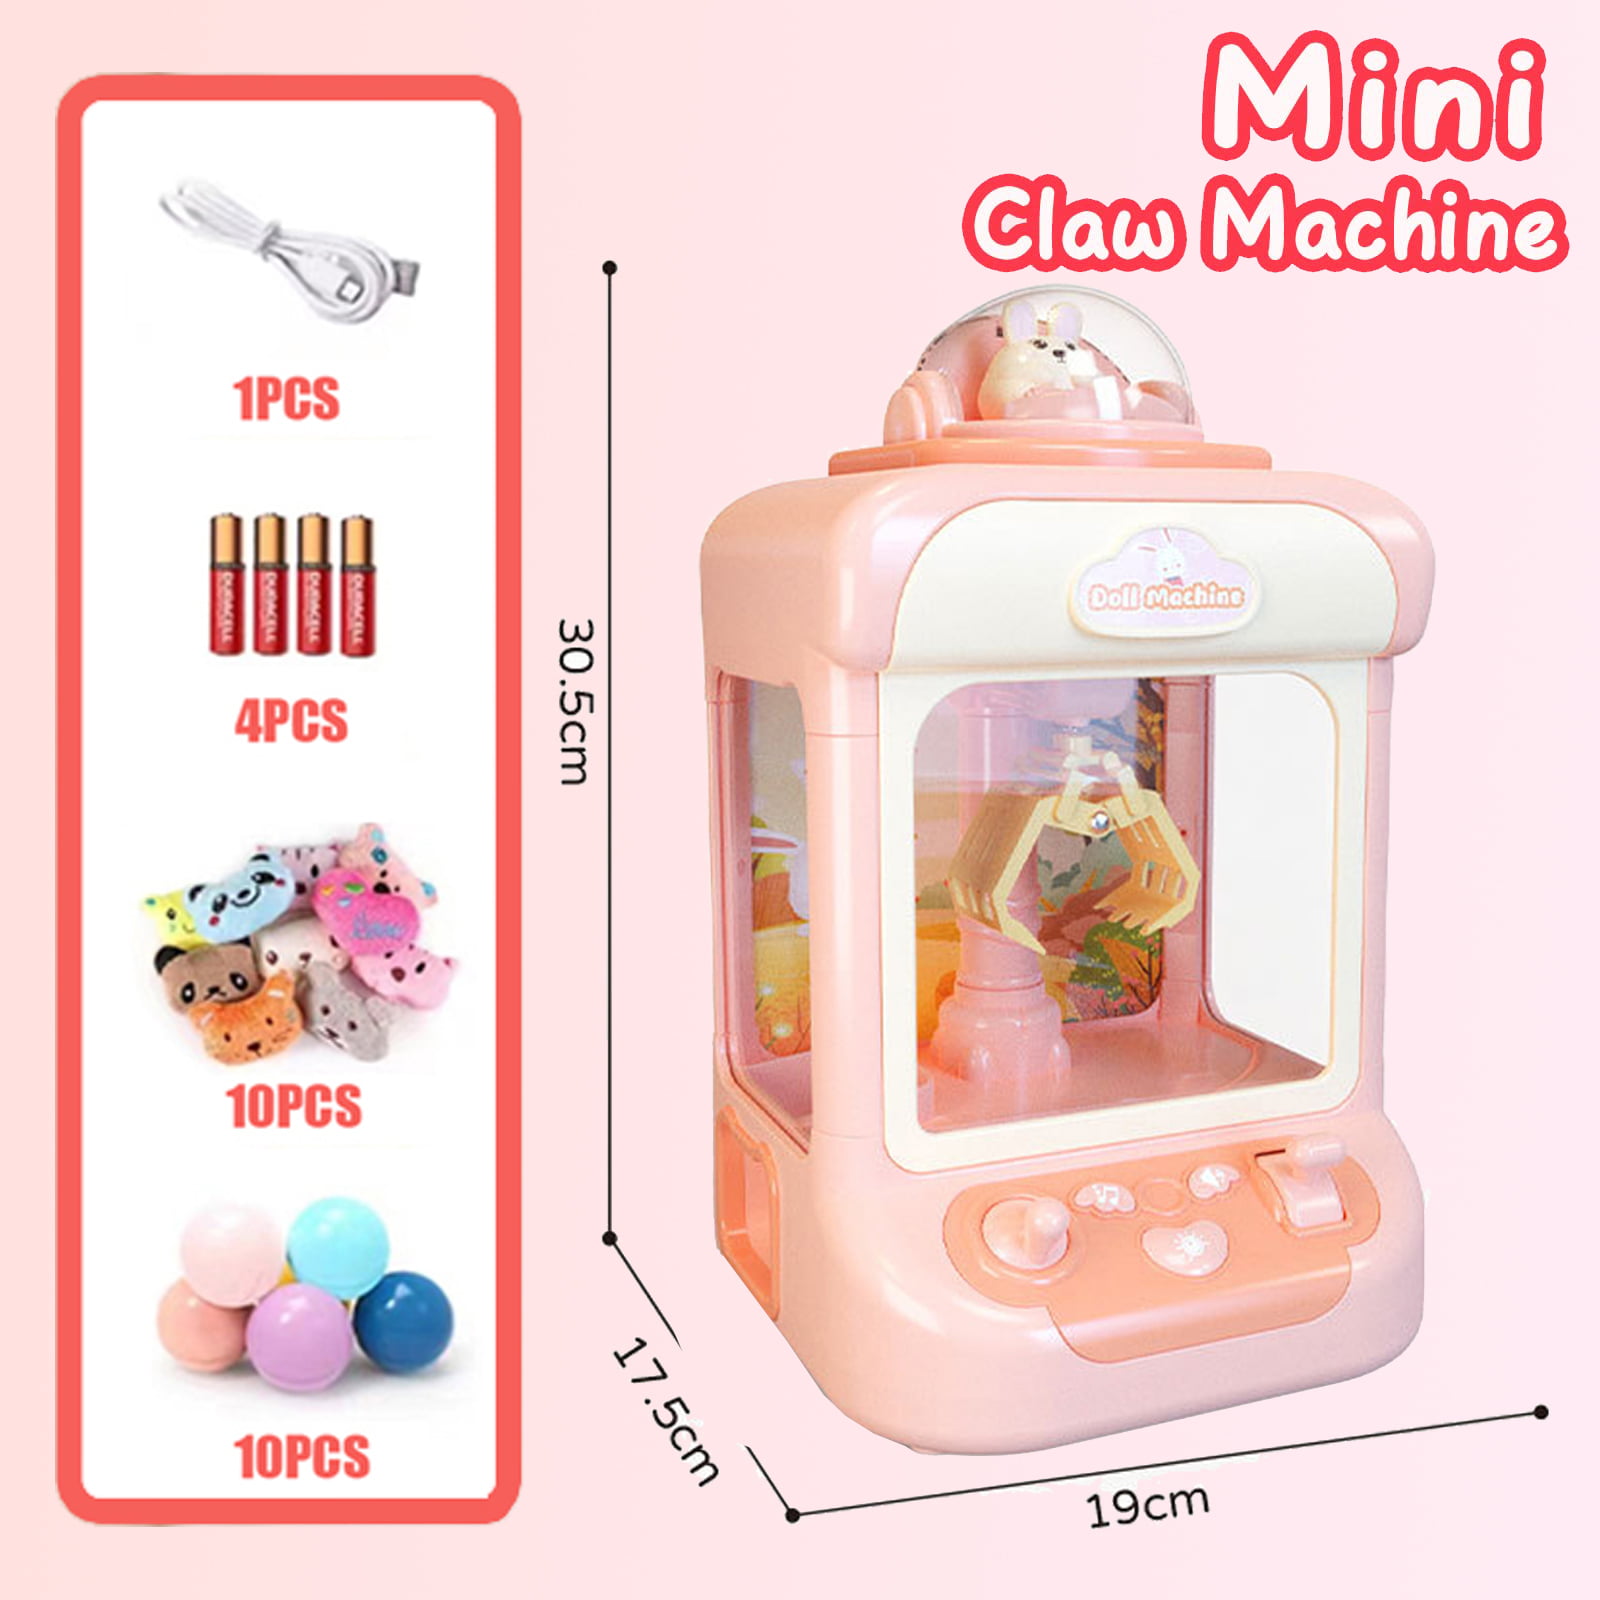 Automatic Doll Machine Toys for Kids Mini Claw Machine Interactive Toys  Birthday Gifts Adjustable Sounds and Music